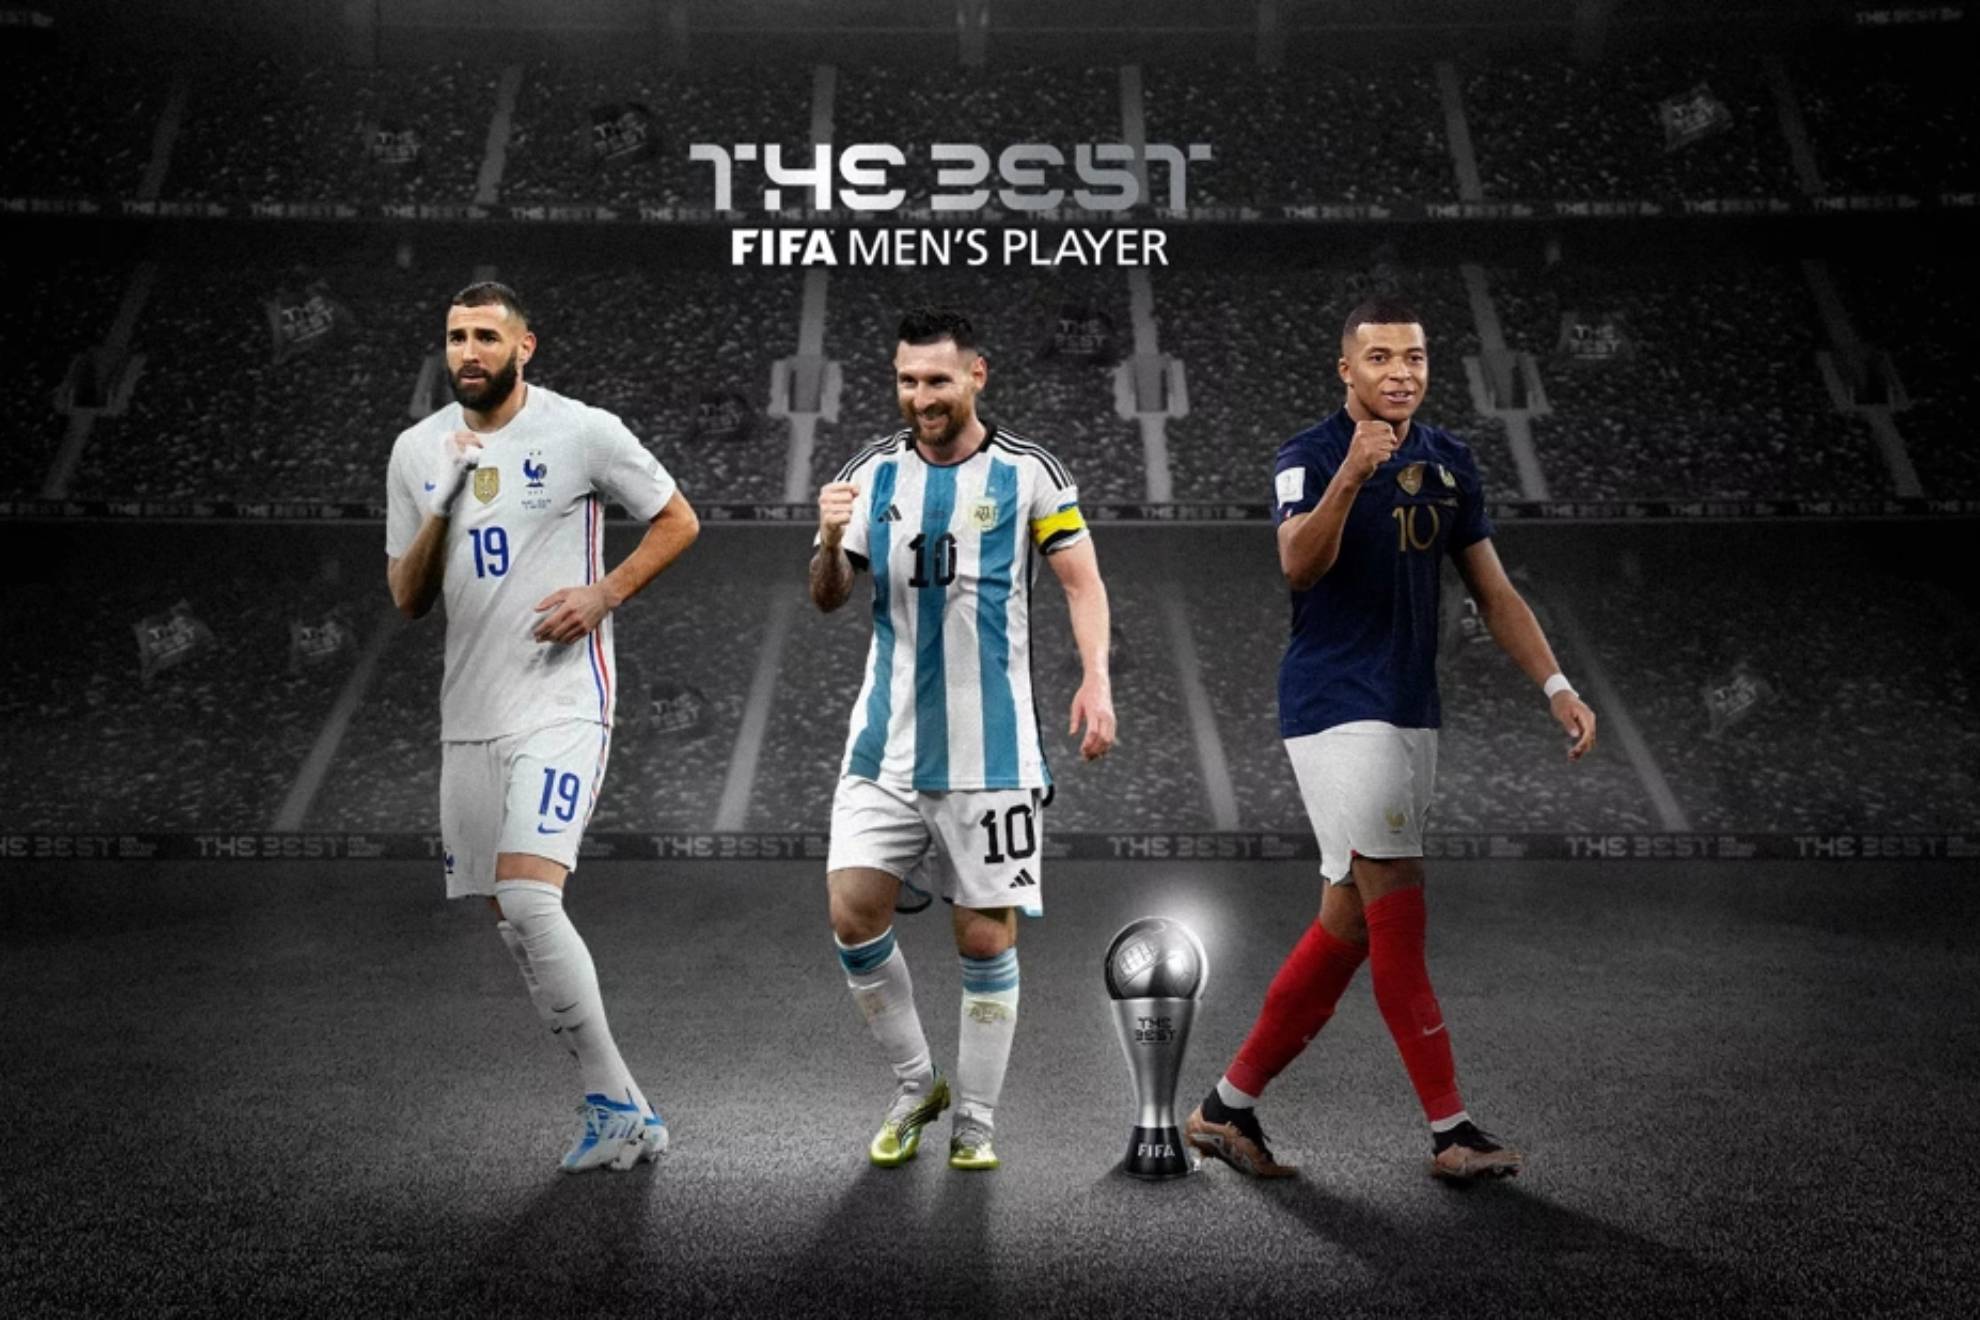 #FIFA The Best Award results leaked – who will win?